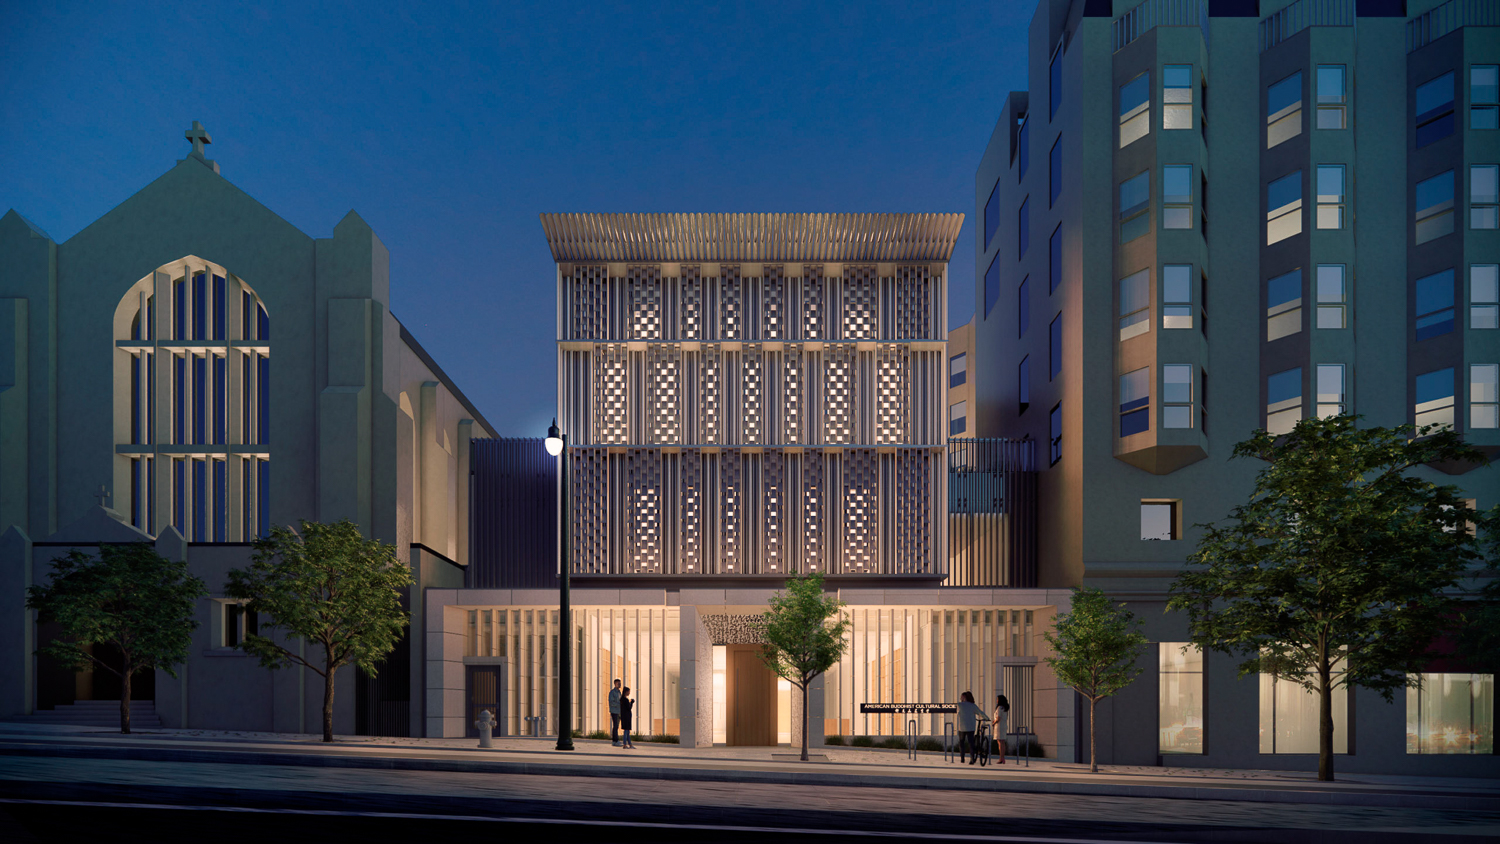 The San Bao Temple at 1750 Van Ness Avenue evening view, rendering by Skidmore, Owings & Merrill